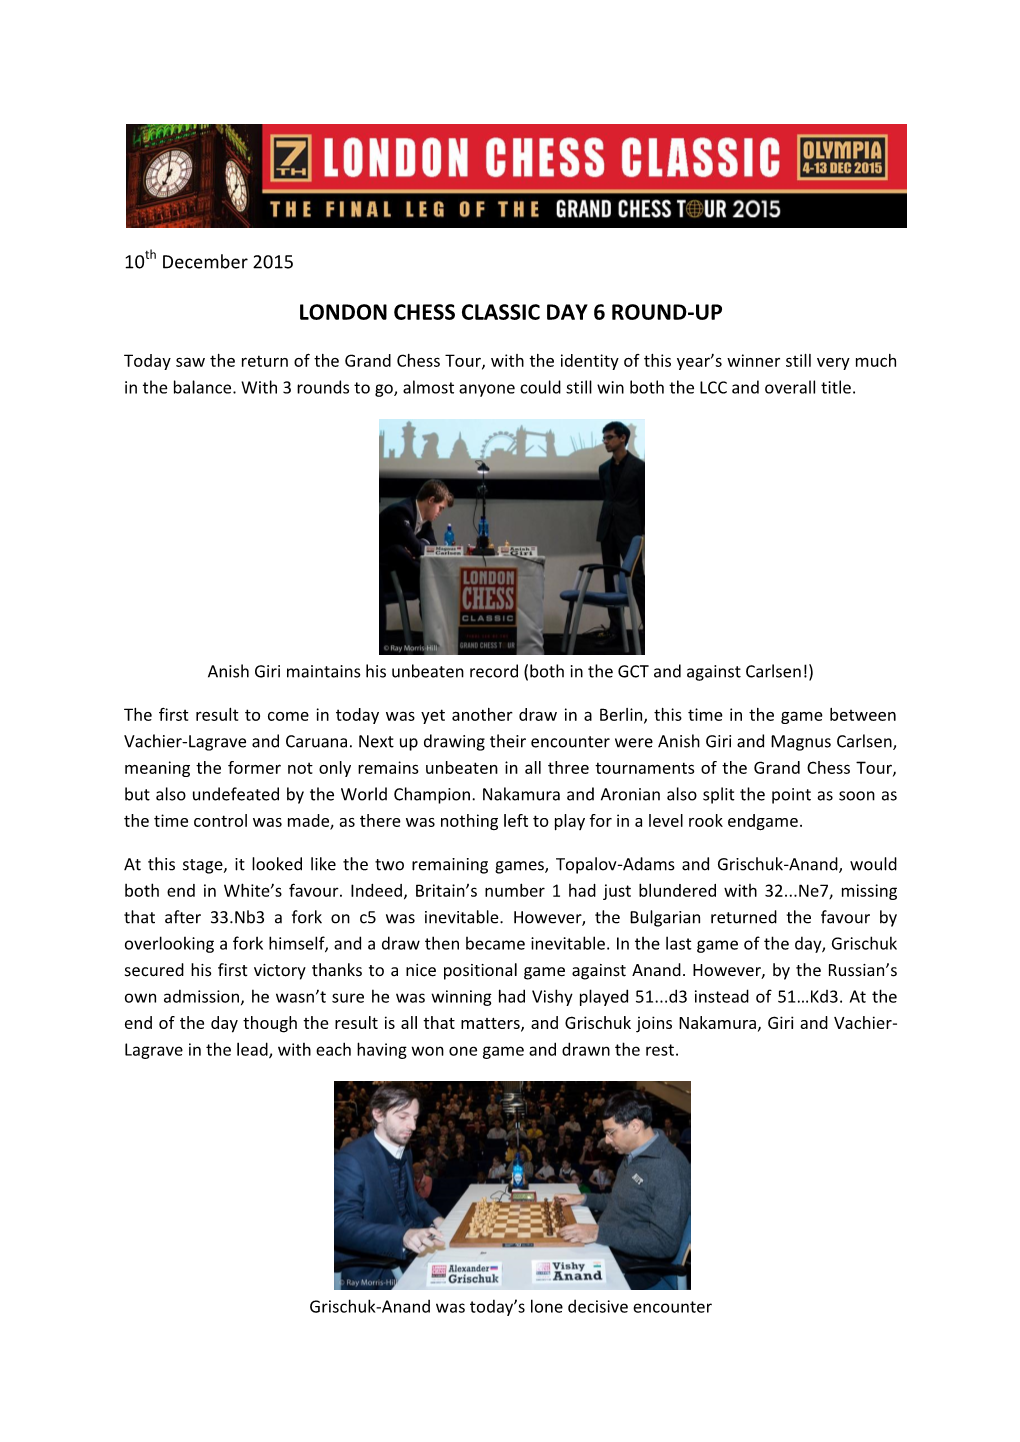 London Chess Classic Day 6 Round-Up